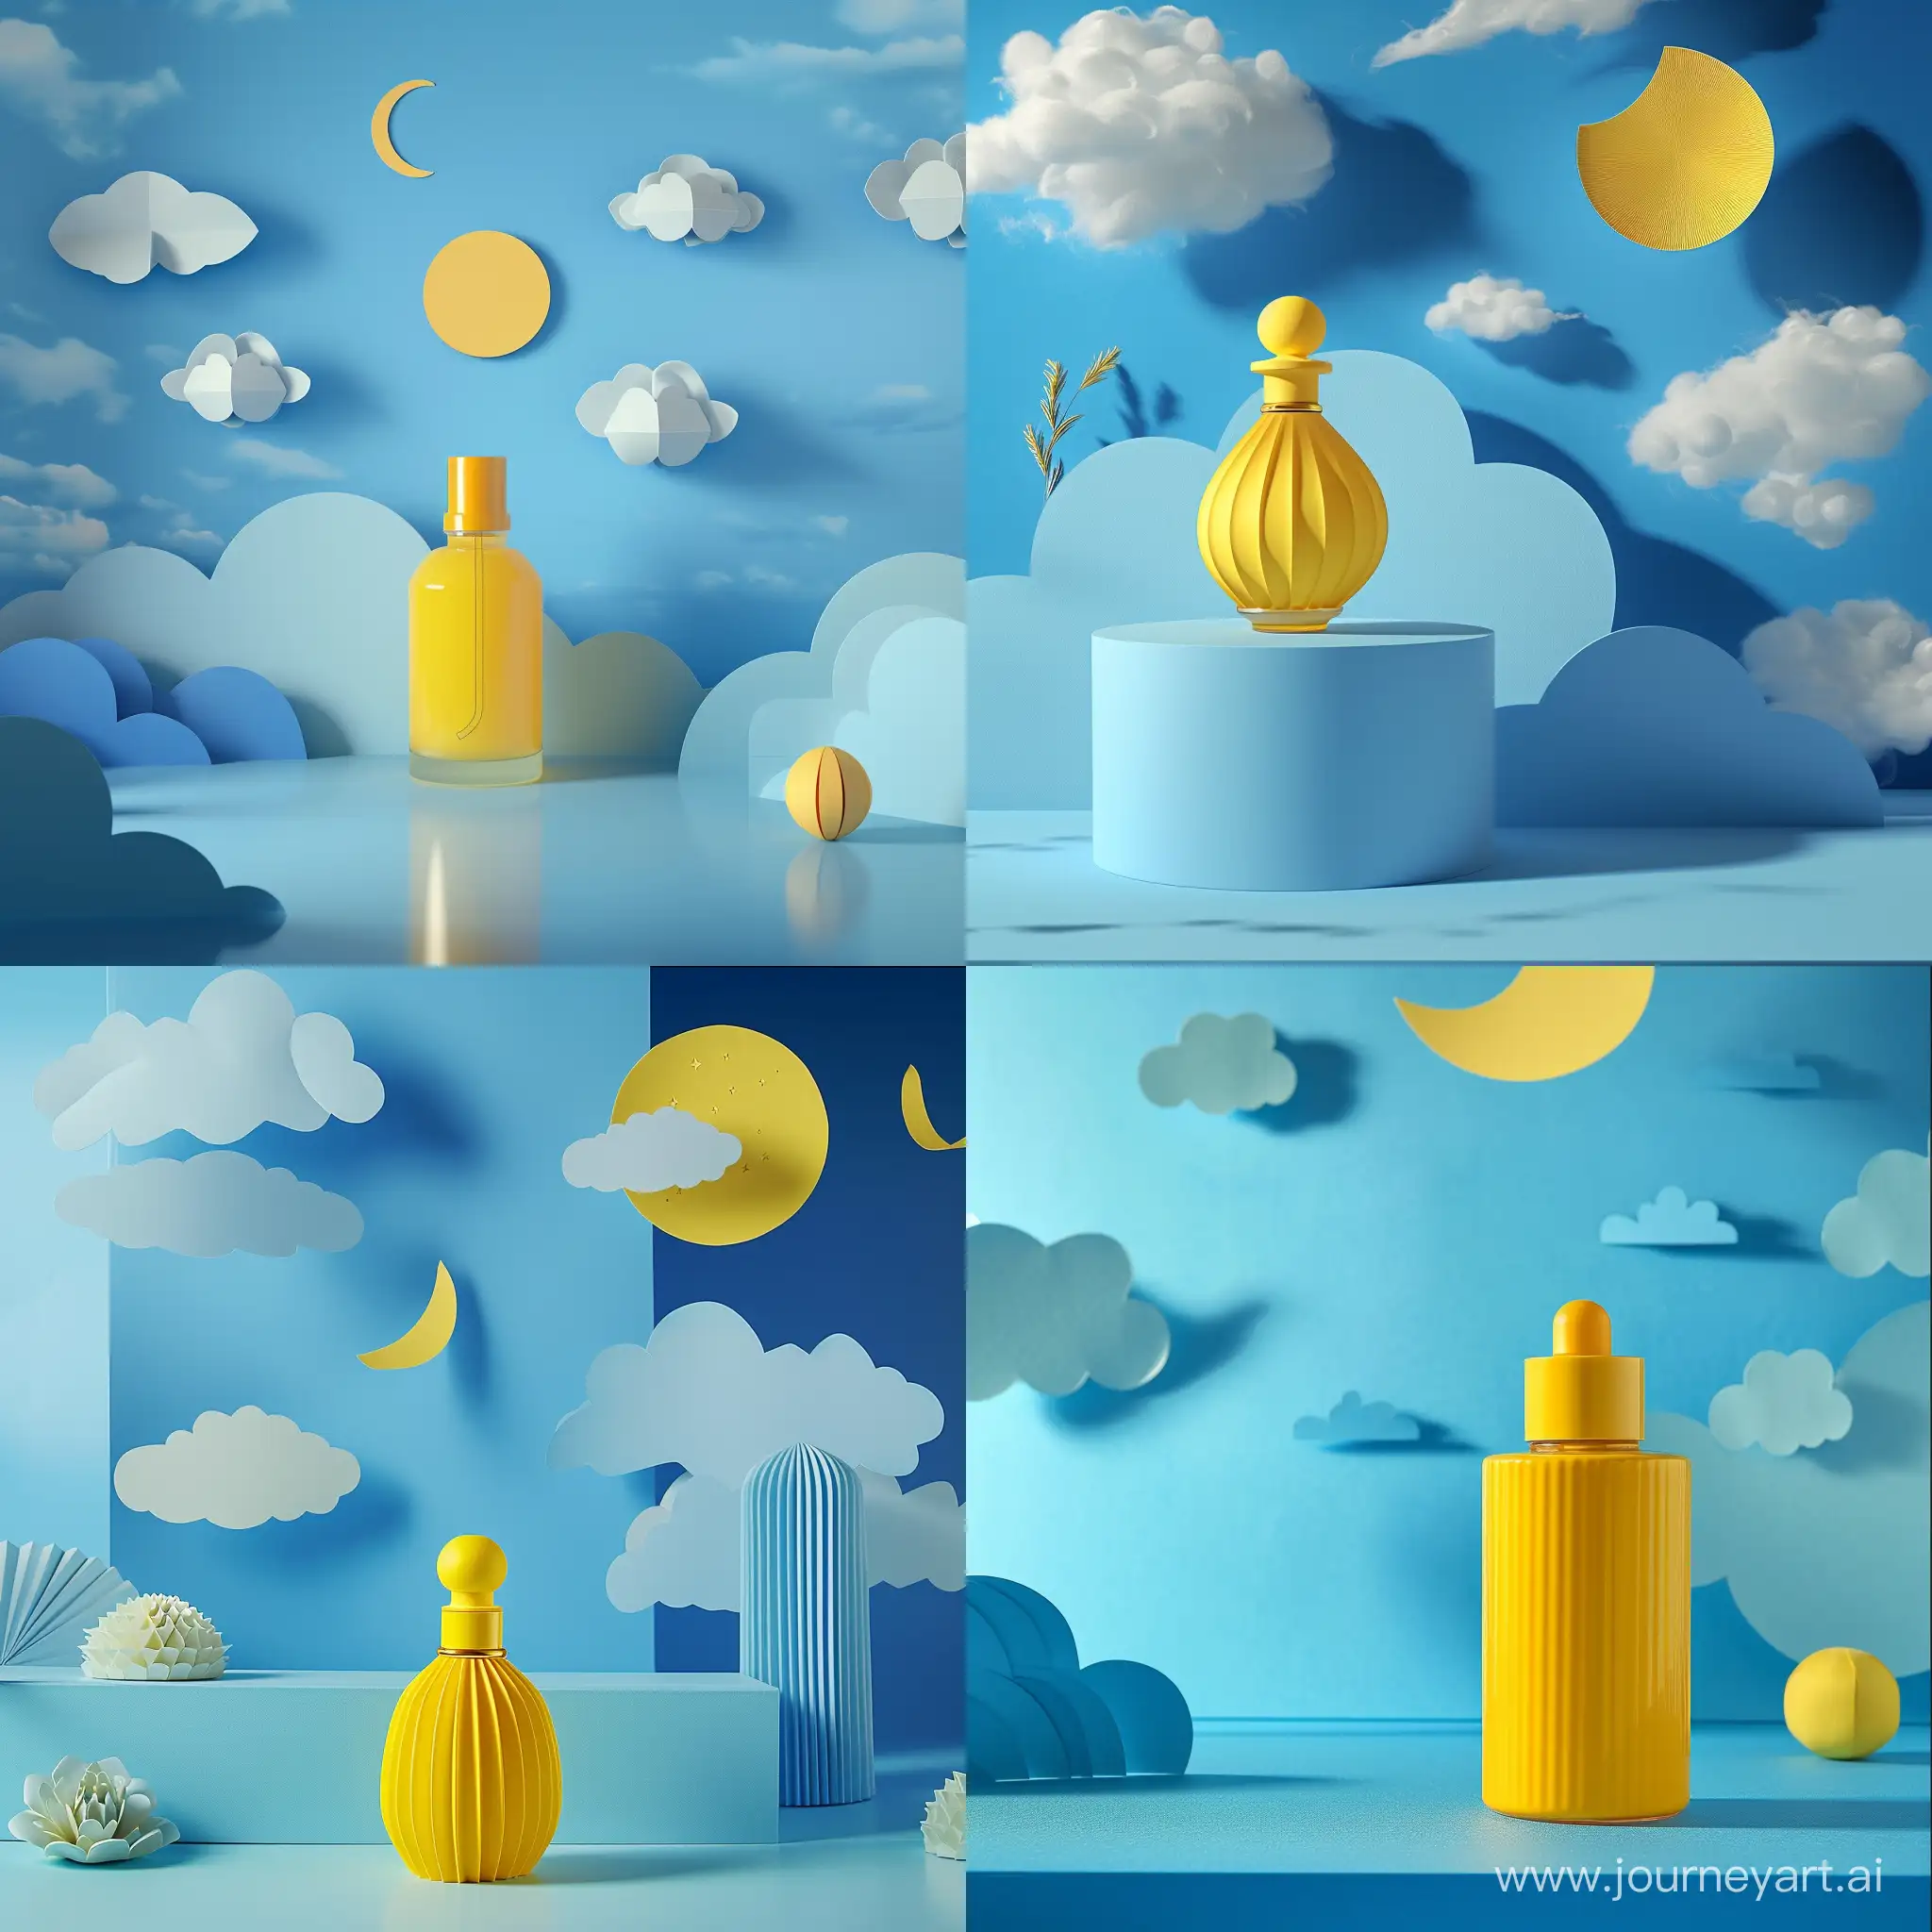 Elegant-Yellow-Perfume-Bottle-on-Blue-Surface-with-Paper-Art-Background